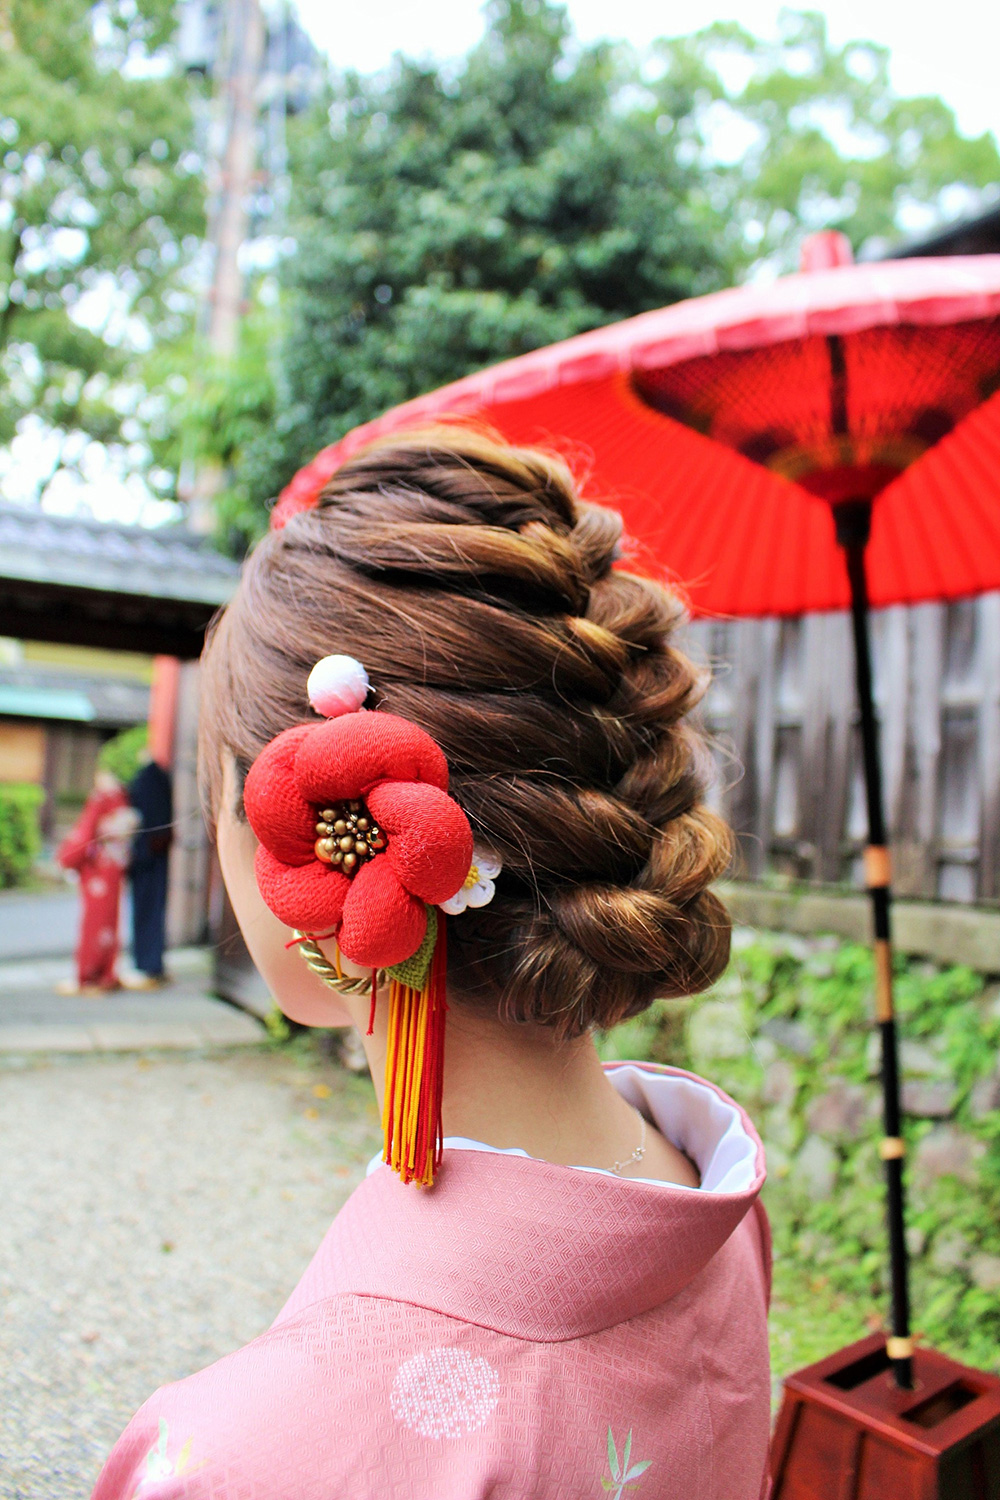 10 Ancient and Medieval Japanese Women's Hairstyles